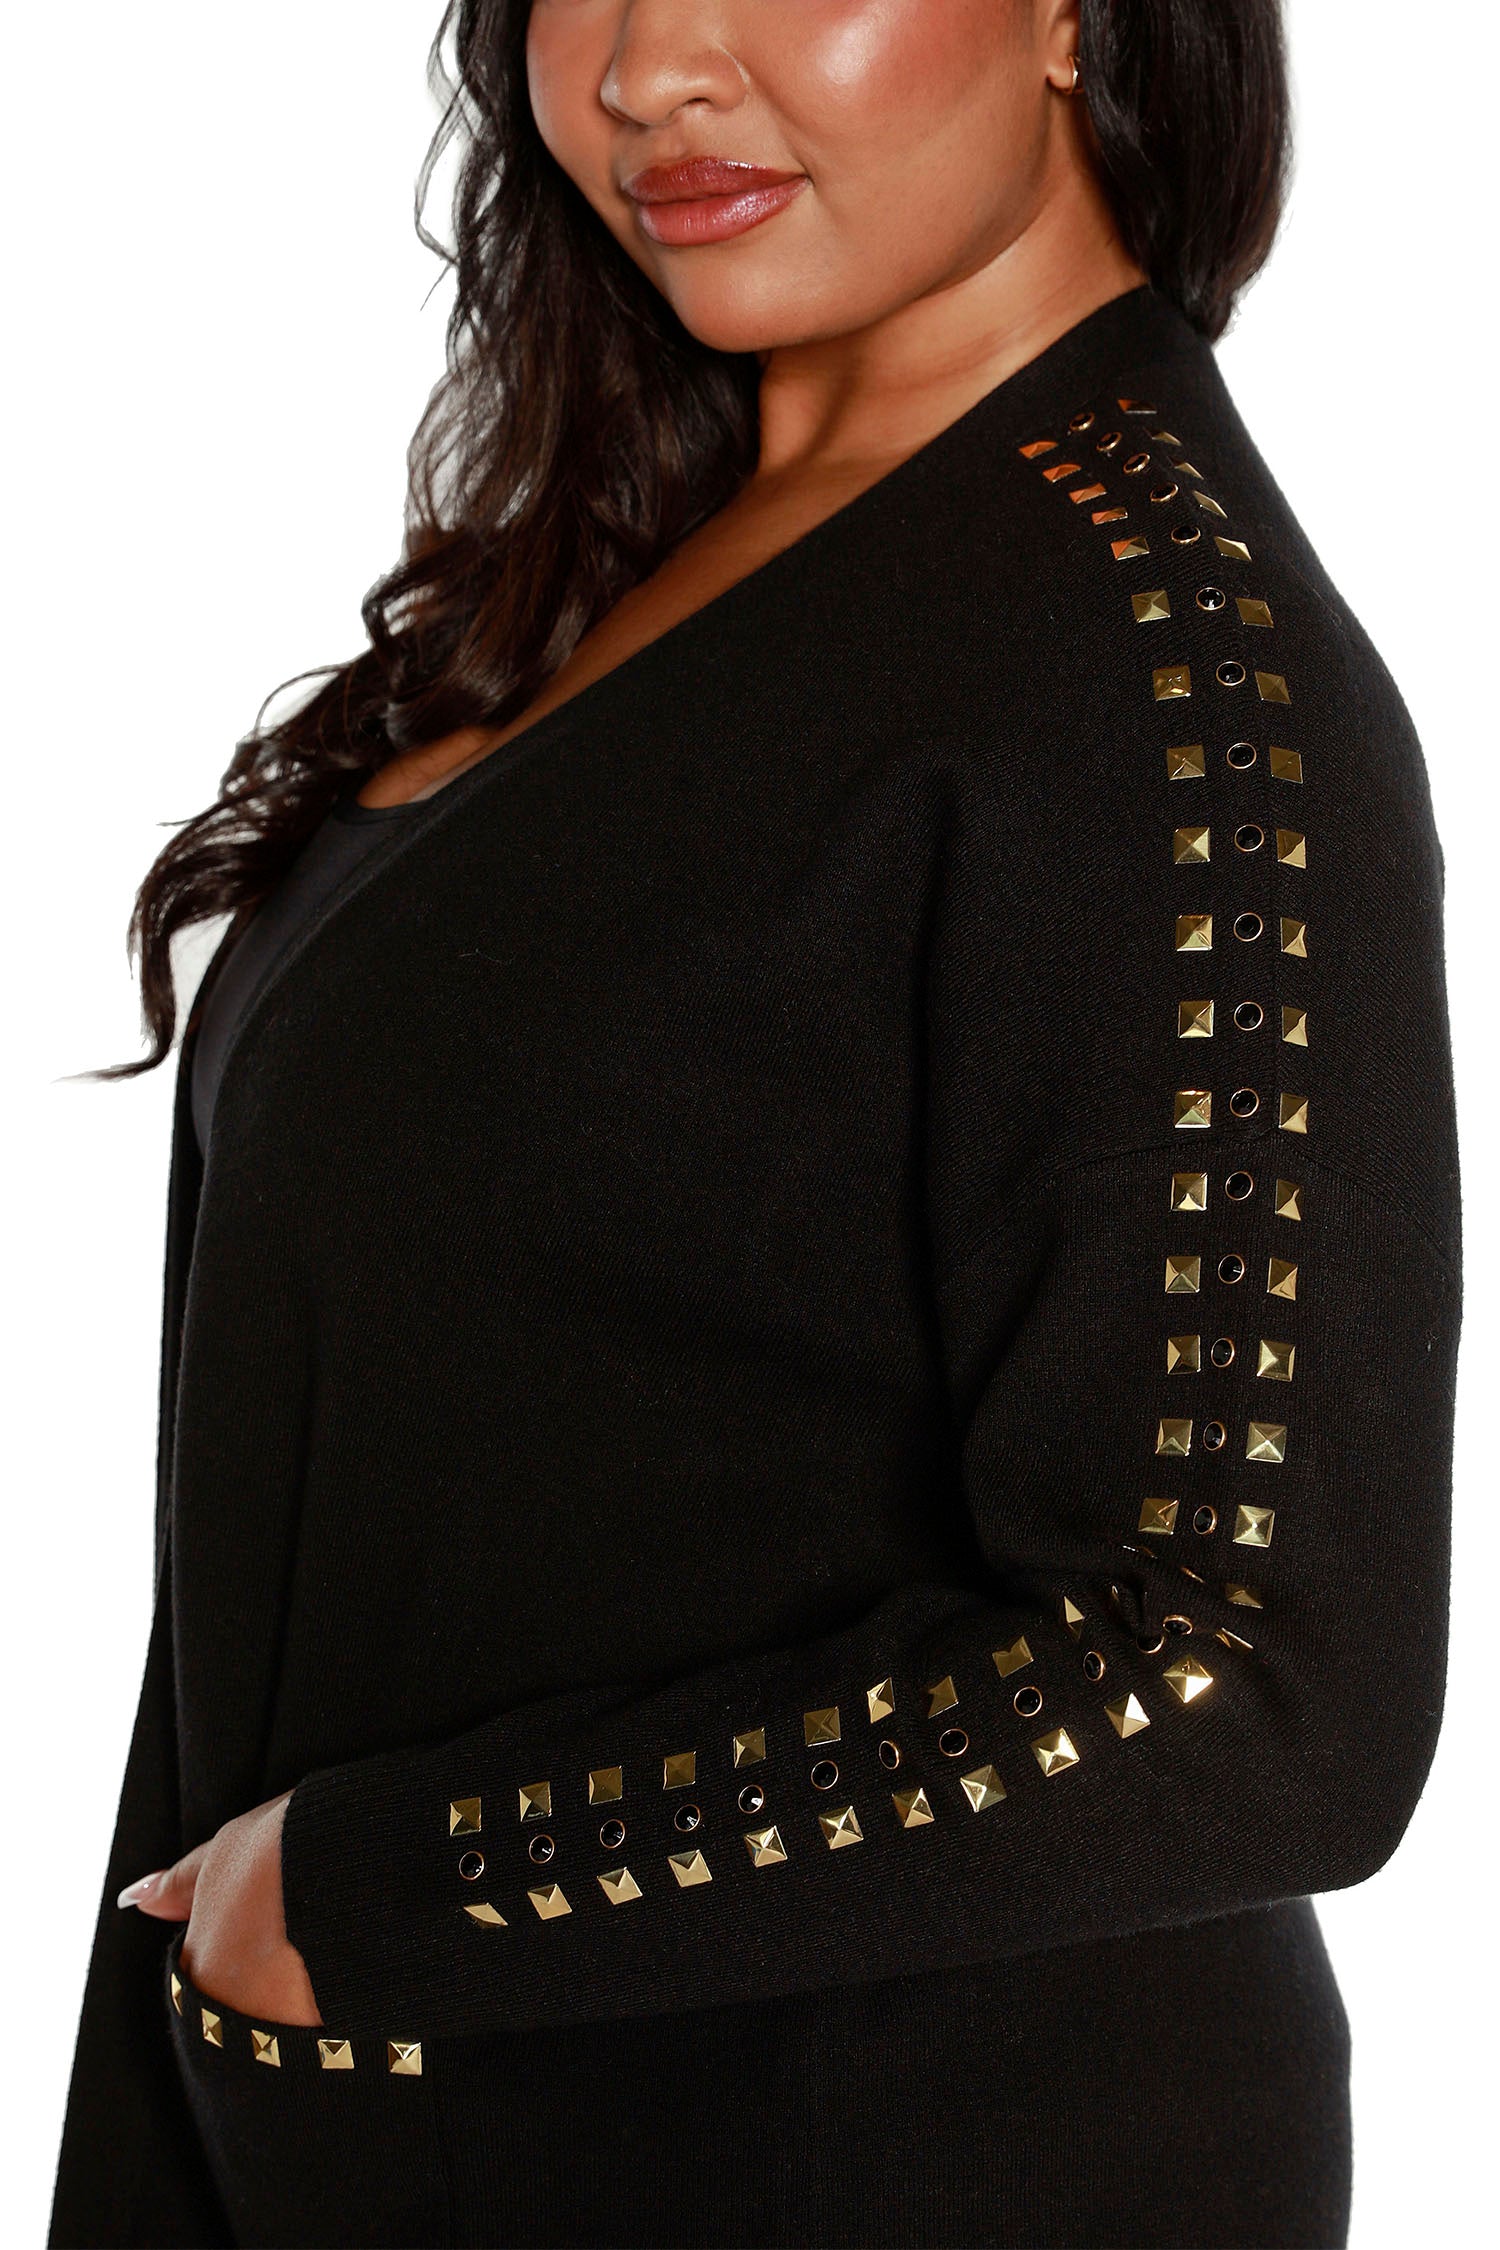 Women’s Lightweight Open Front Cardigan with Rhinestones, Studs and Patch Pockets | Curvy